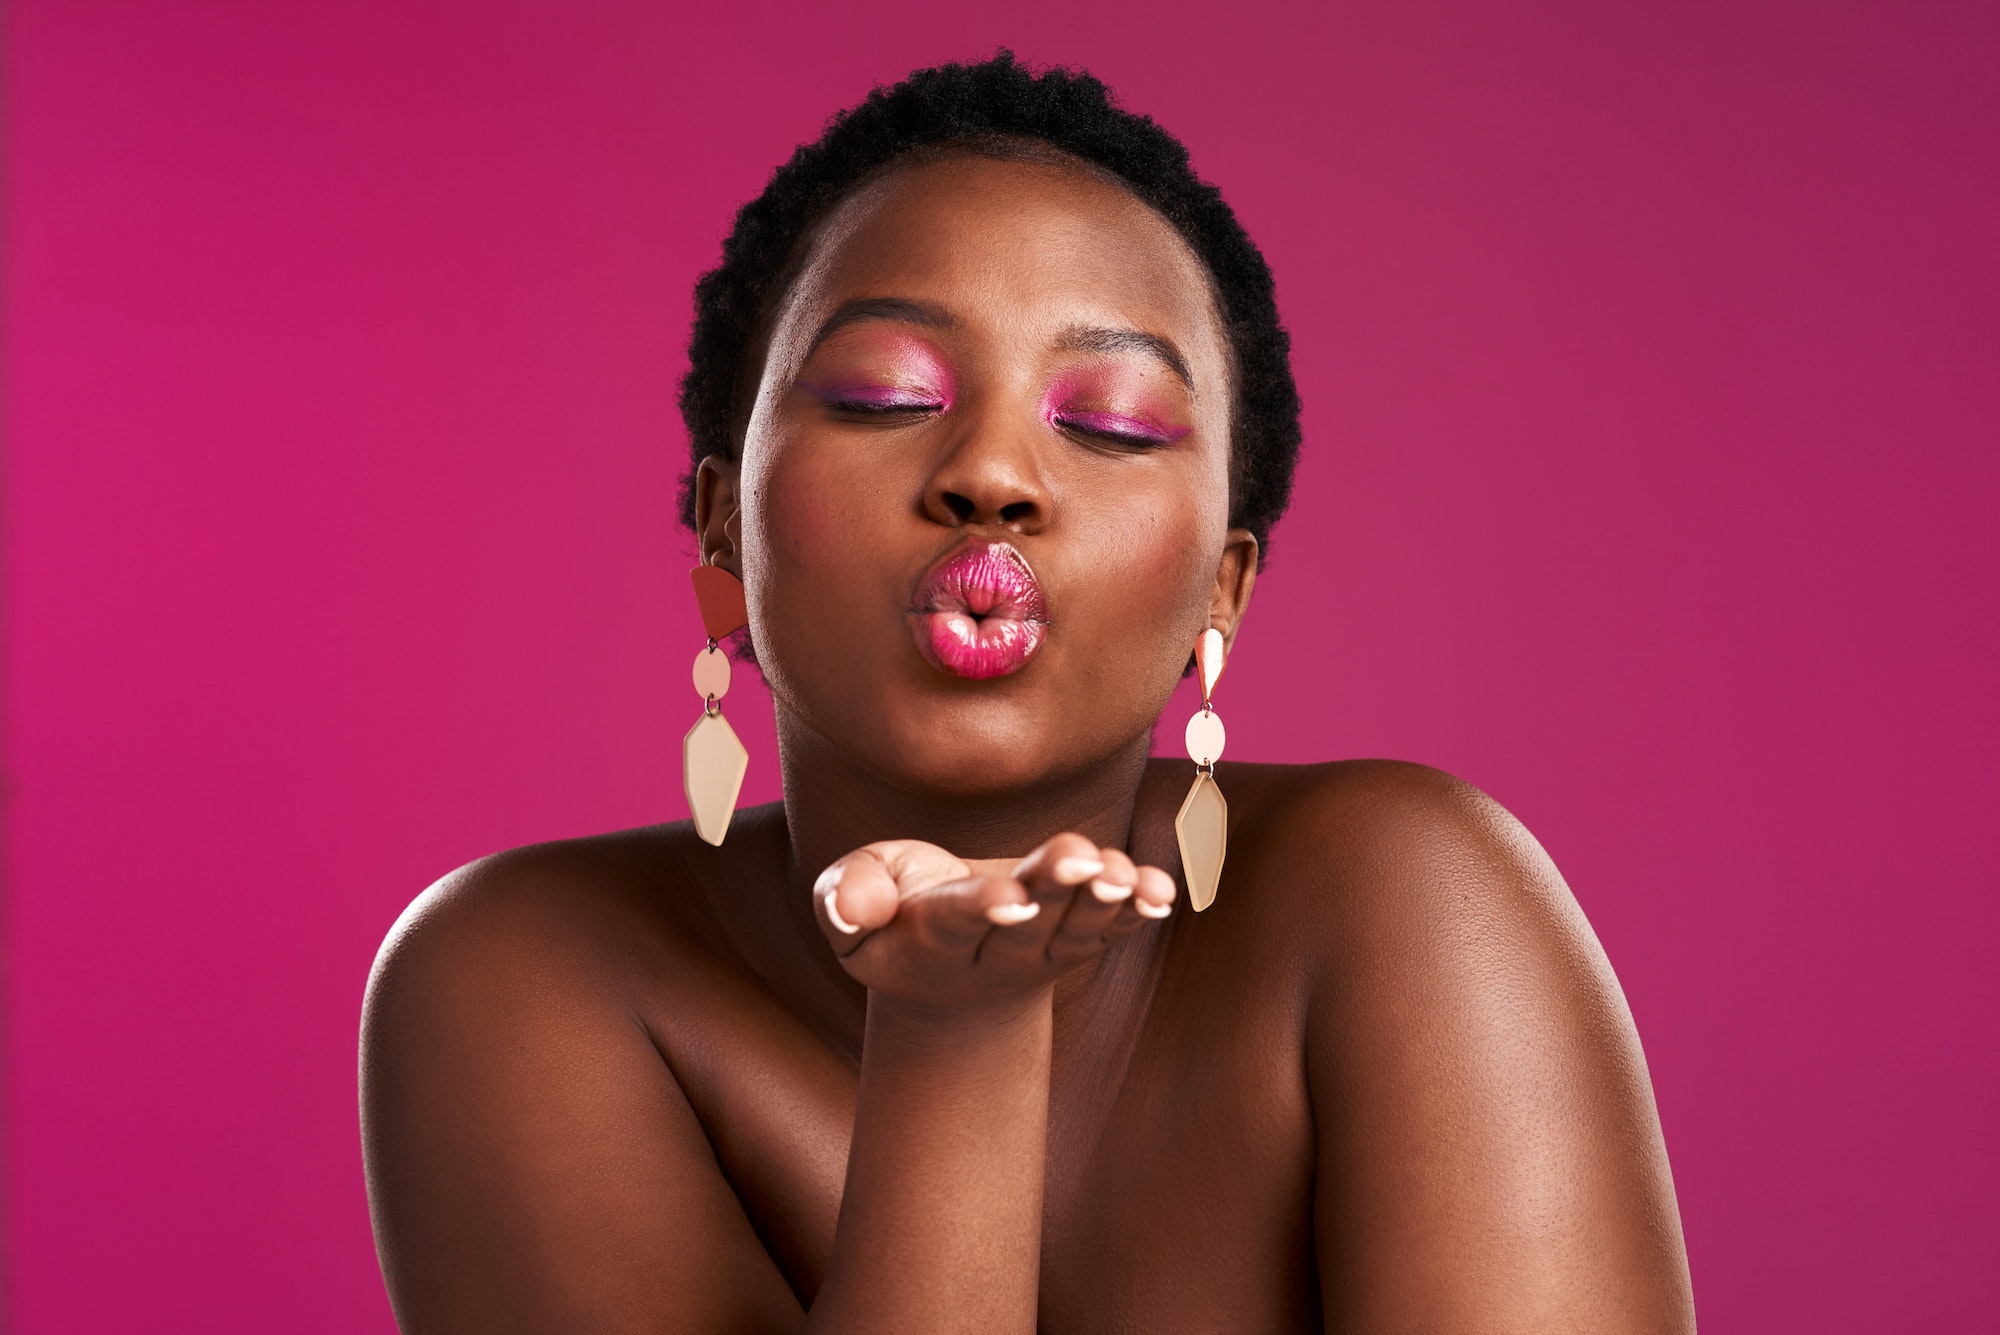 Studio shot of a beautiful young woman blowing a kiss against a pink background